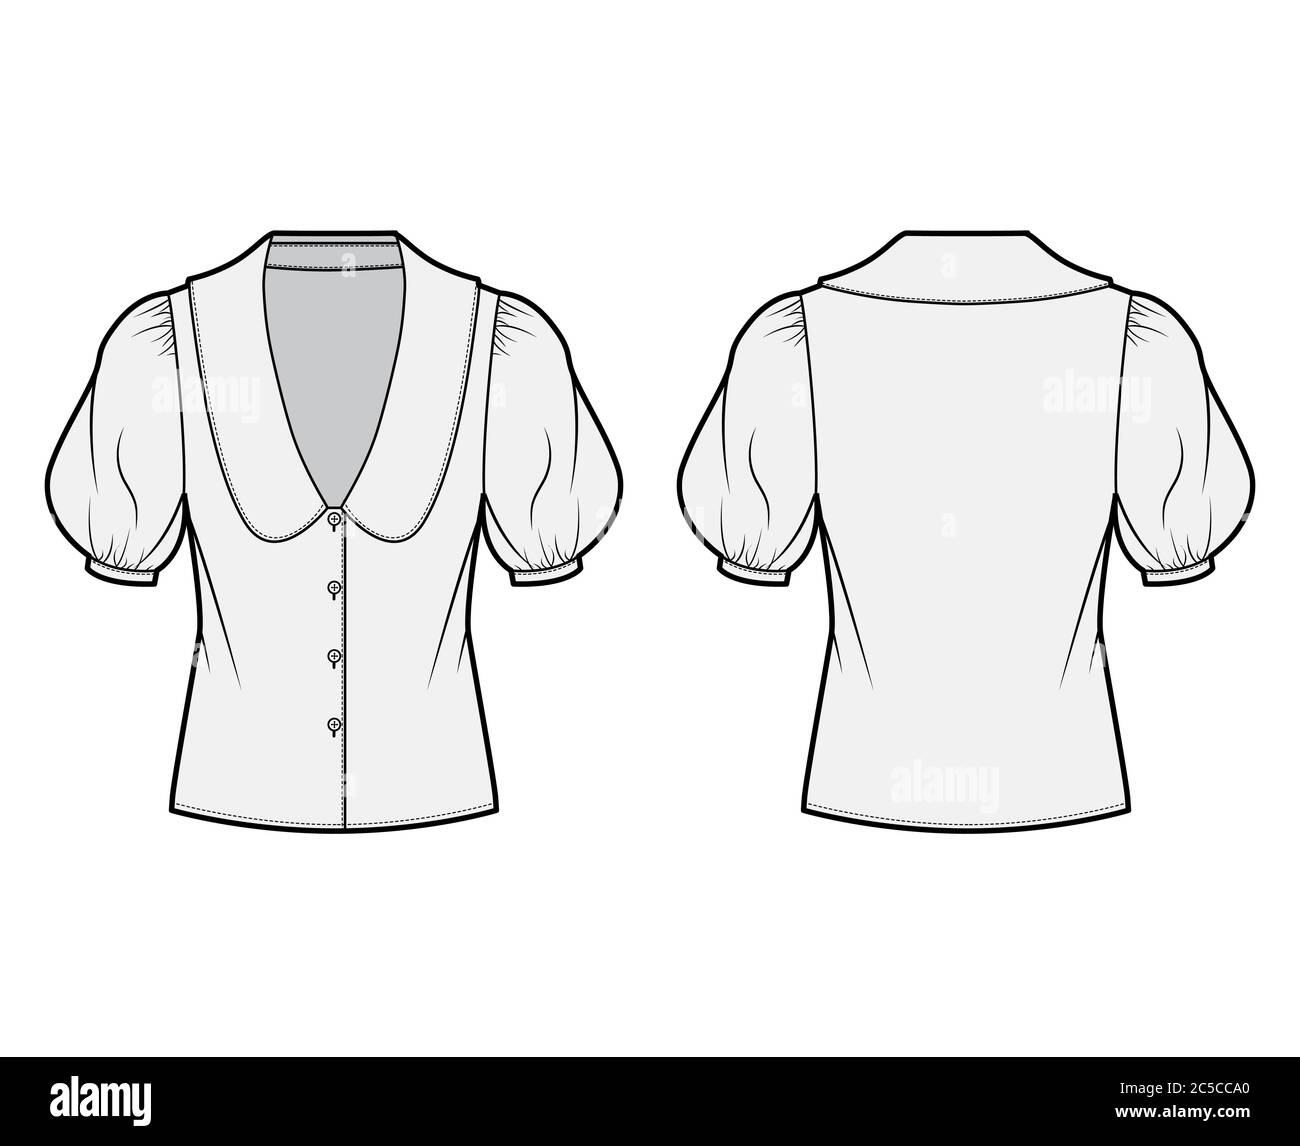 Blouse technical fashion illustration with collar framing V neck, oversized medium puffed sleeves and body. Flat apparel template front, back, grey color. Women, men unisex garment CAD mockup Stock Vector